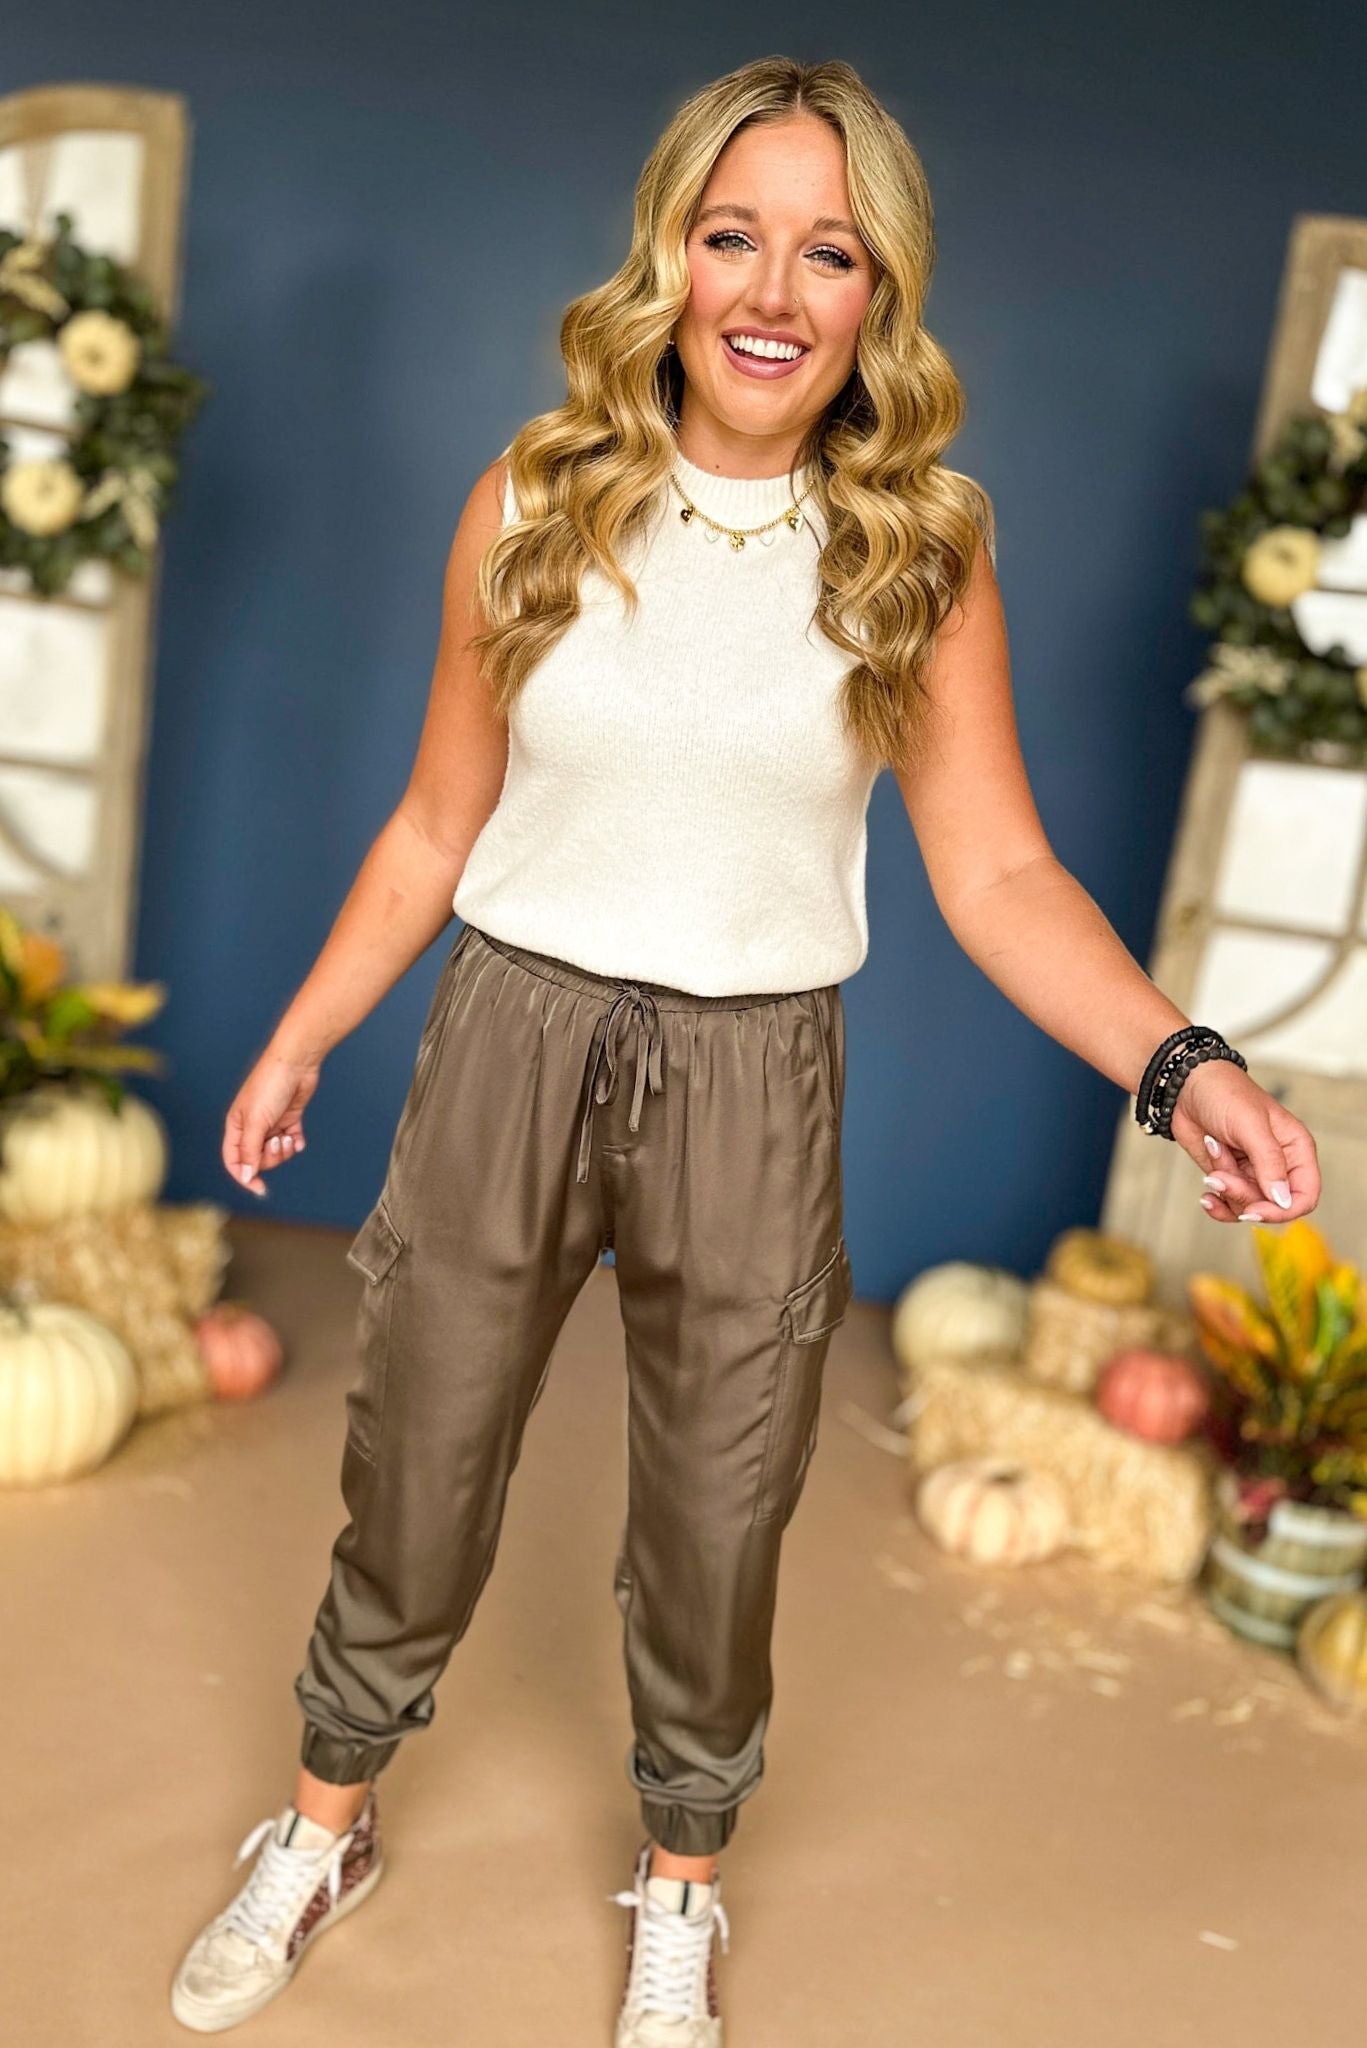 Load image into Gallery viewer, Green Satin Jogger Pants, must have pants, must have style, street style, fall style, fall fashion, fall pants, elevated style, elevated pants, mom style, shop style your senses by mallory fitzsimmons
